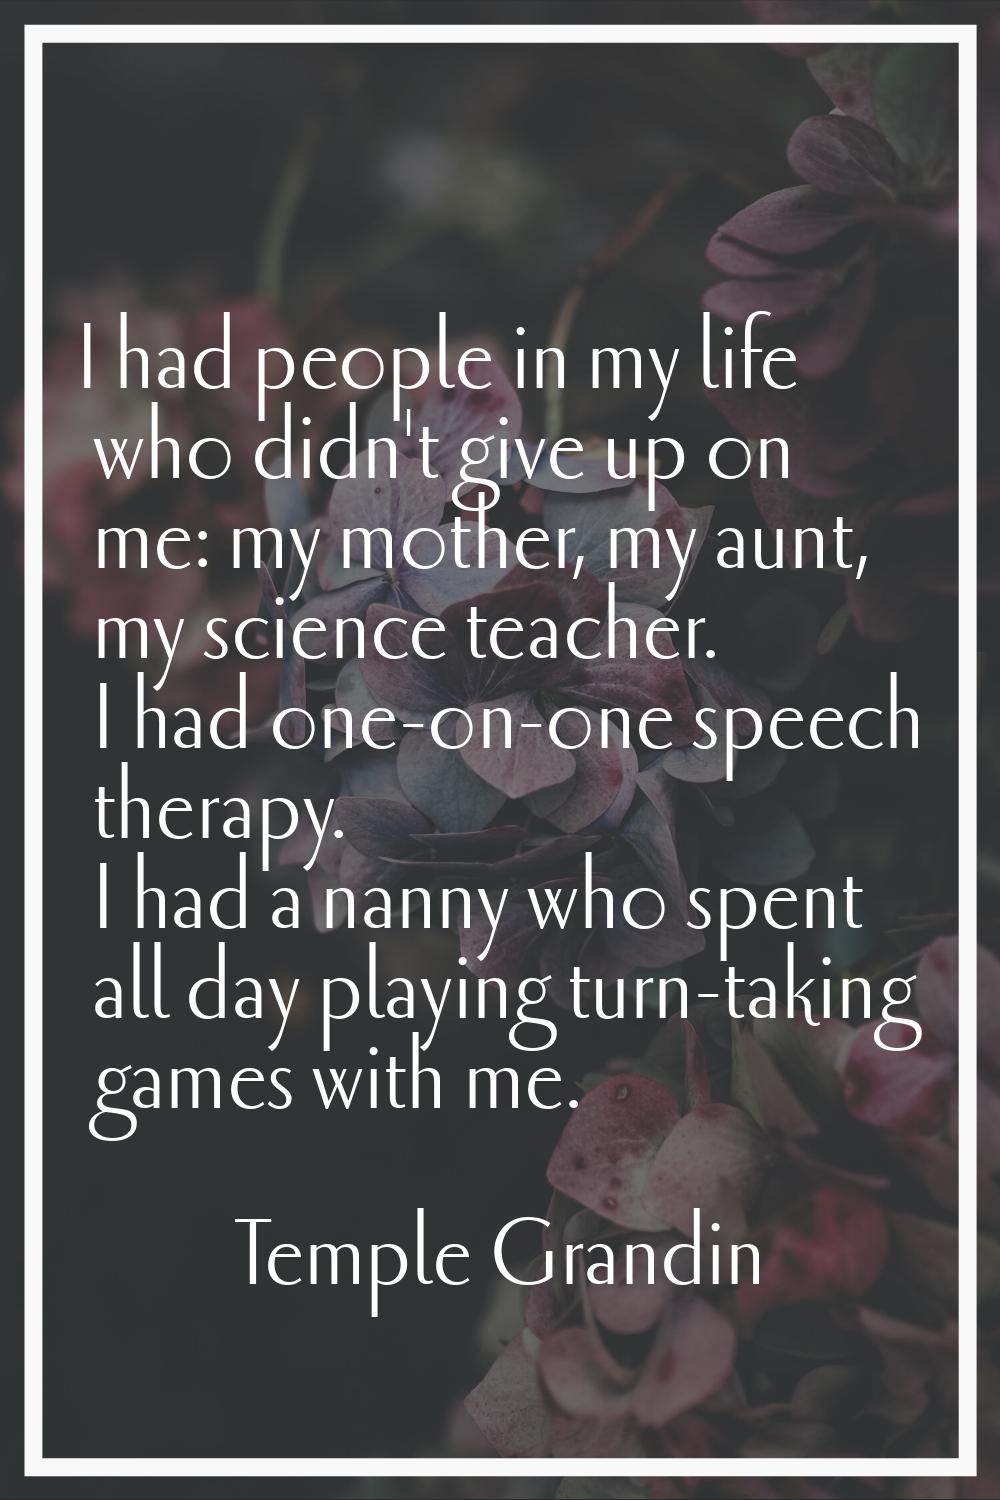 I had people in my life who didn't give up on me: my mother, my aunt, my science teacher. I had one